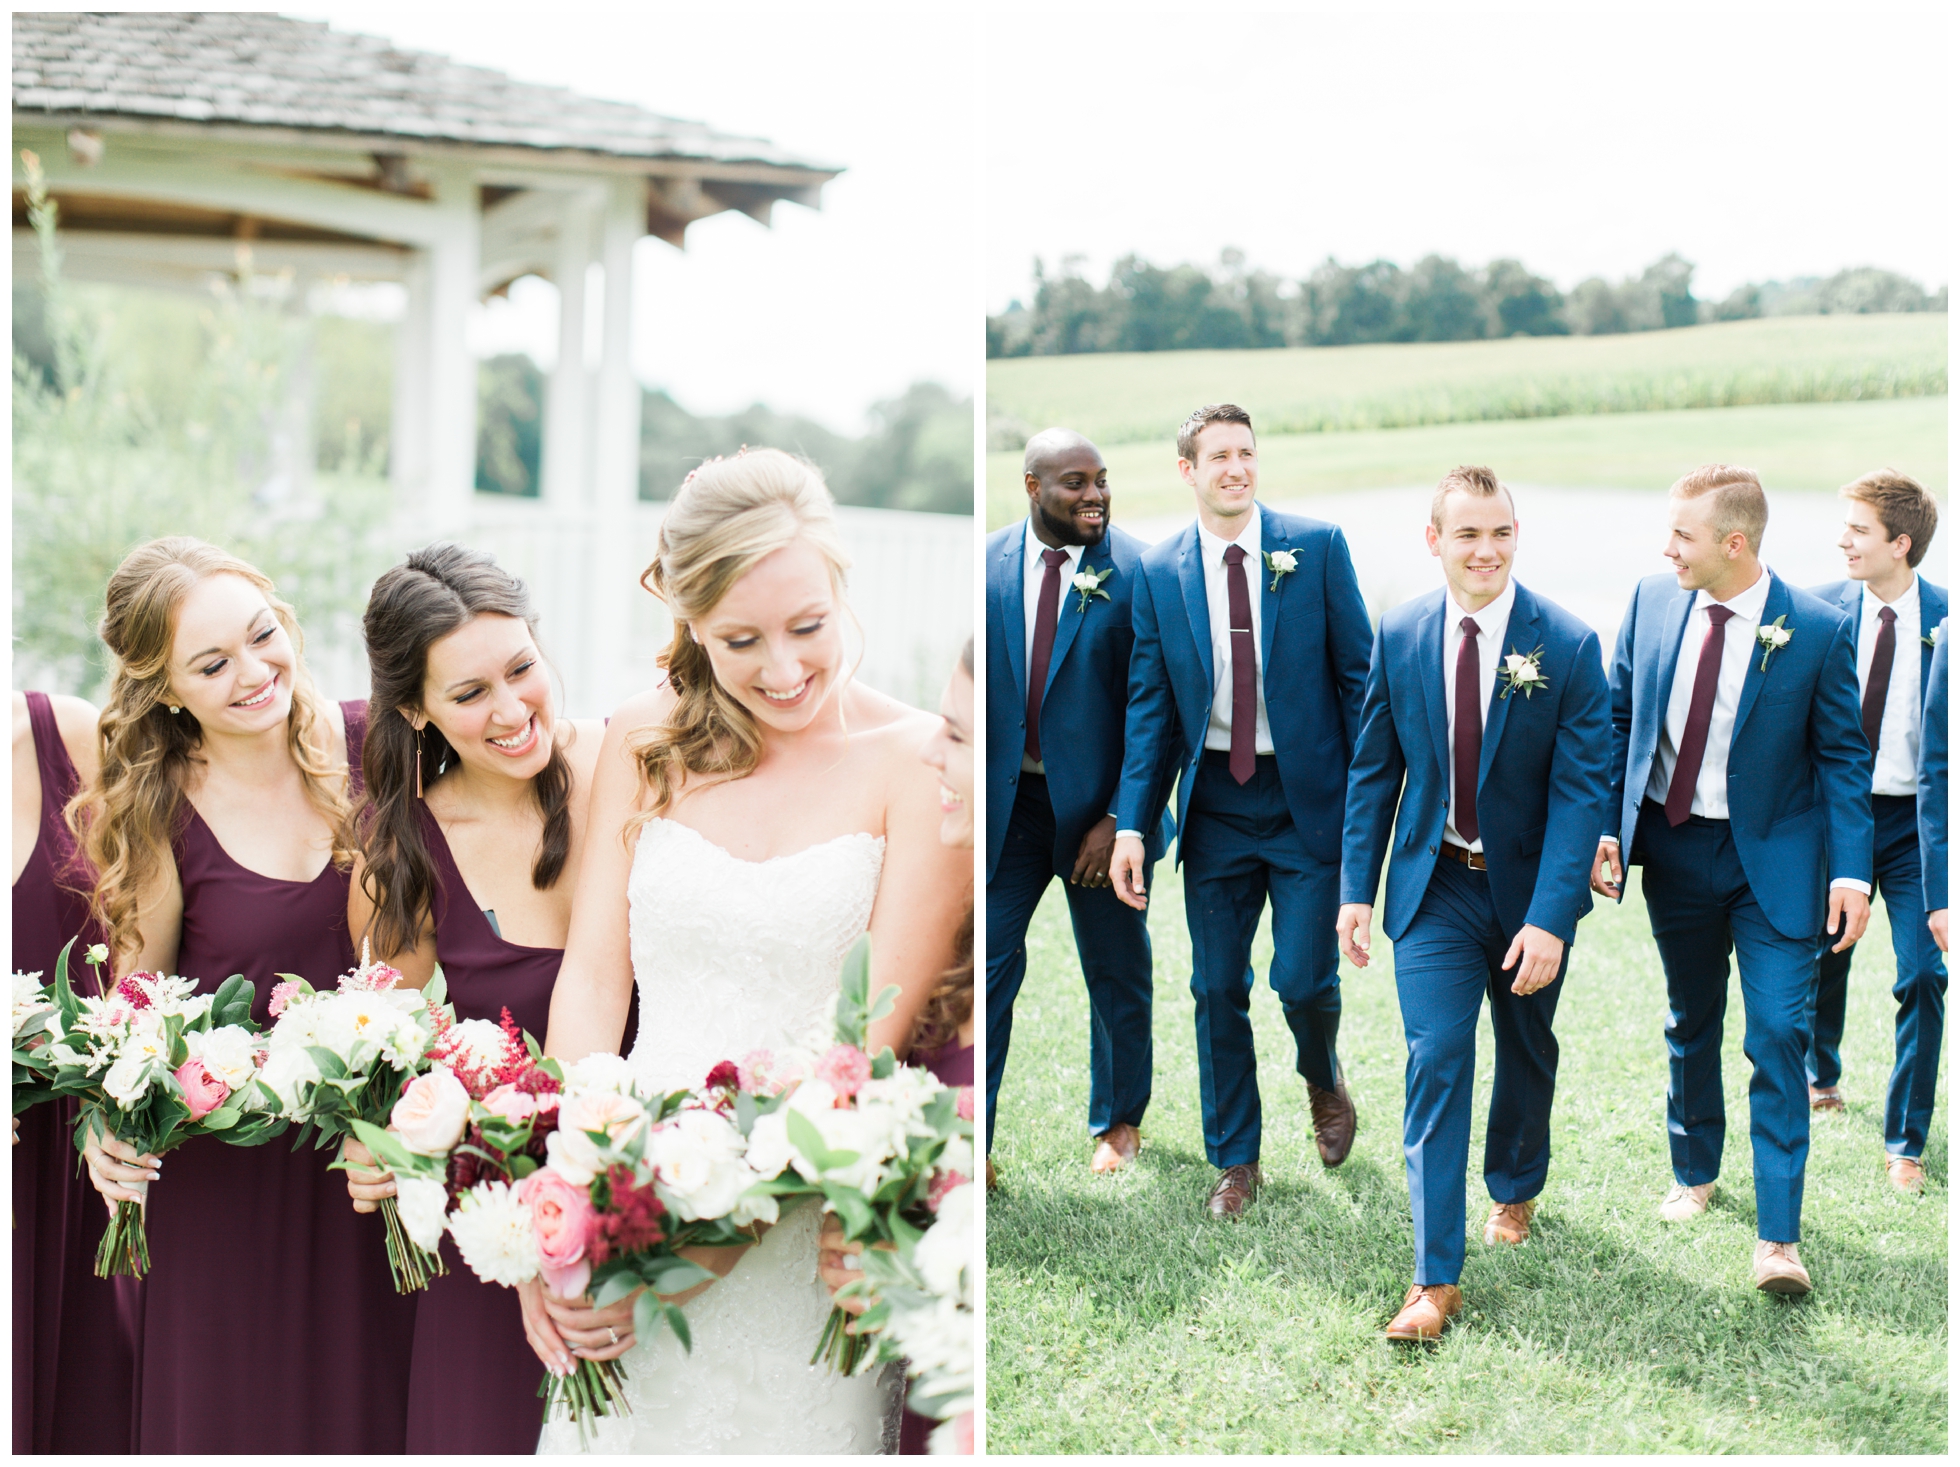 a lush colorful summer wedding in pittsburgh, pa